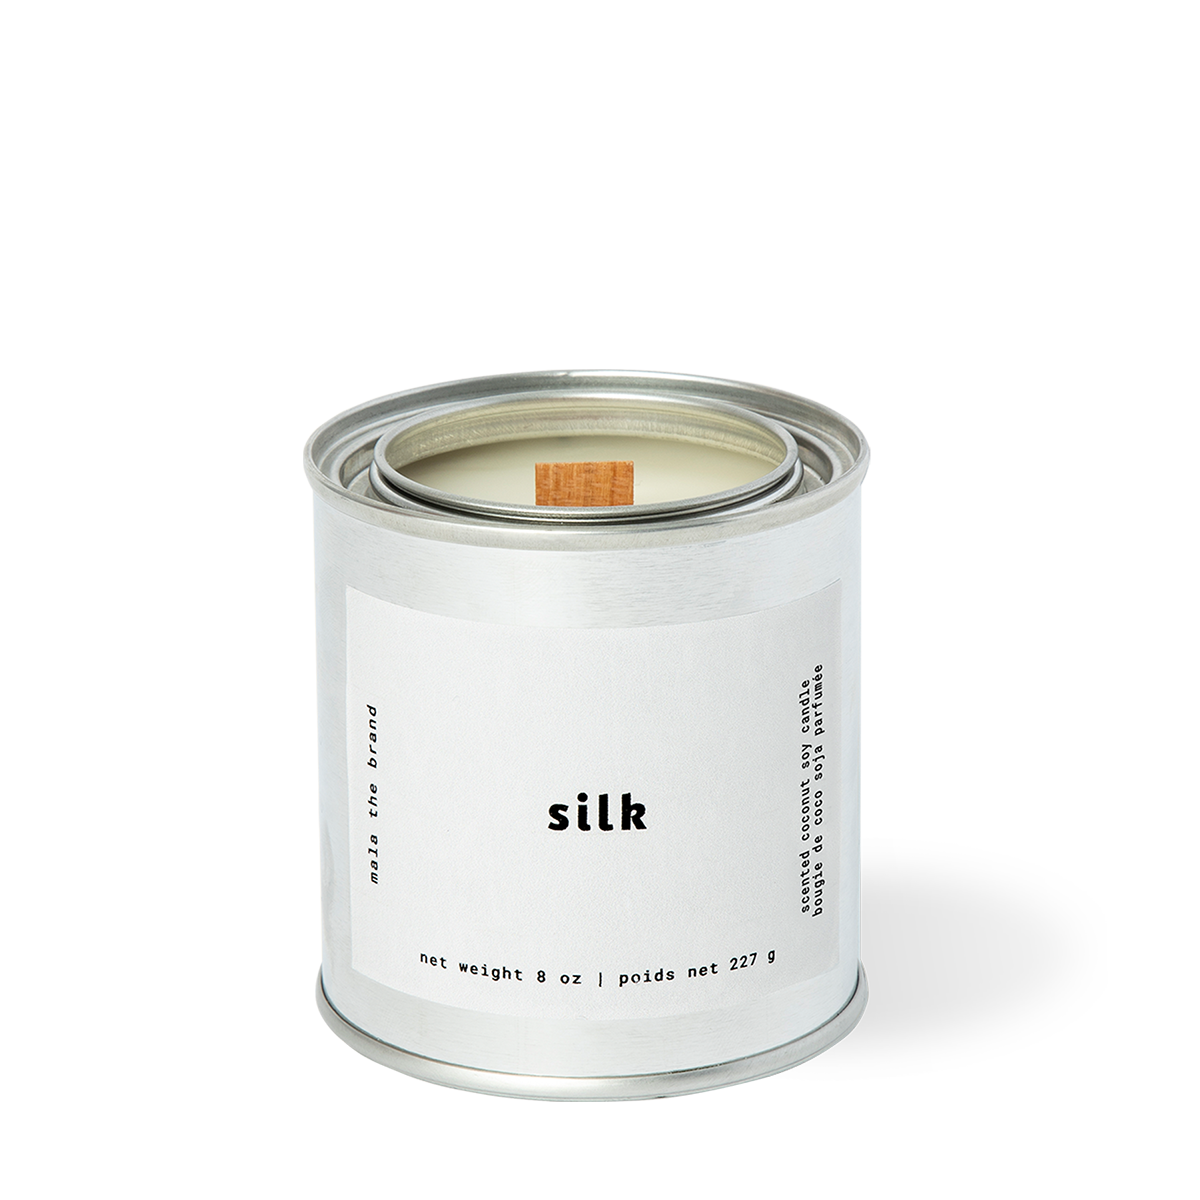 Image of candle with white label and white text says, "Silk". 